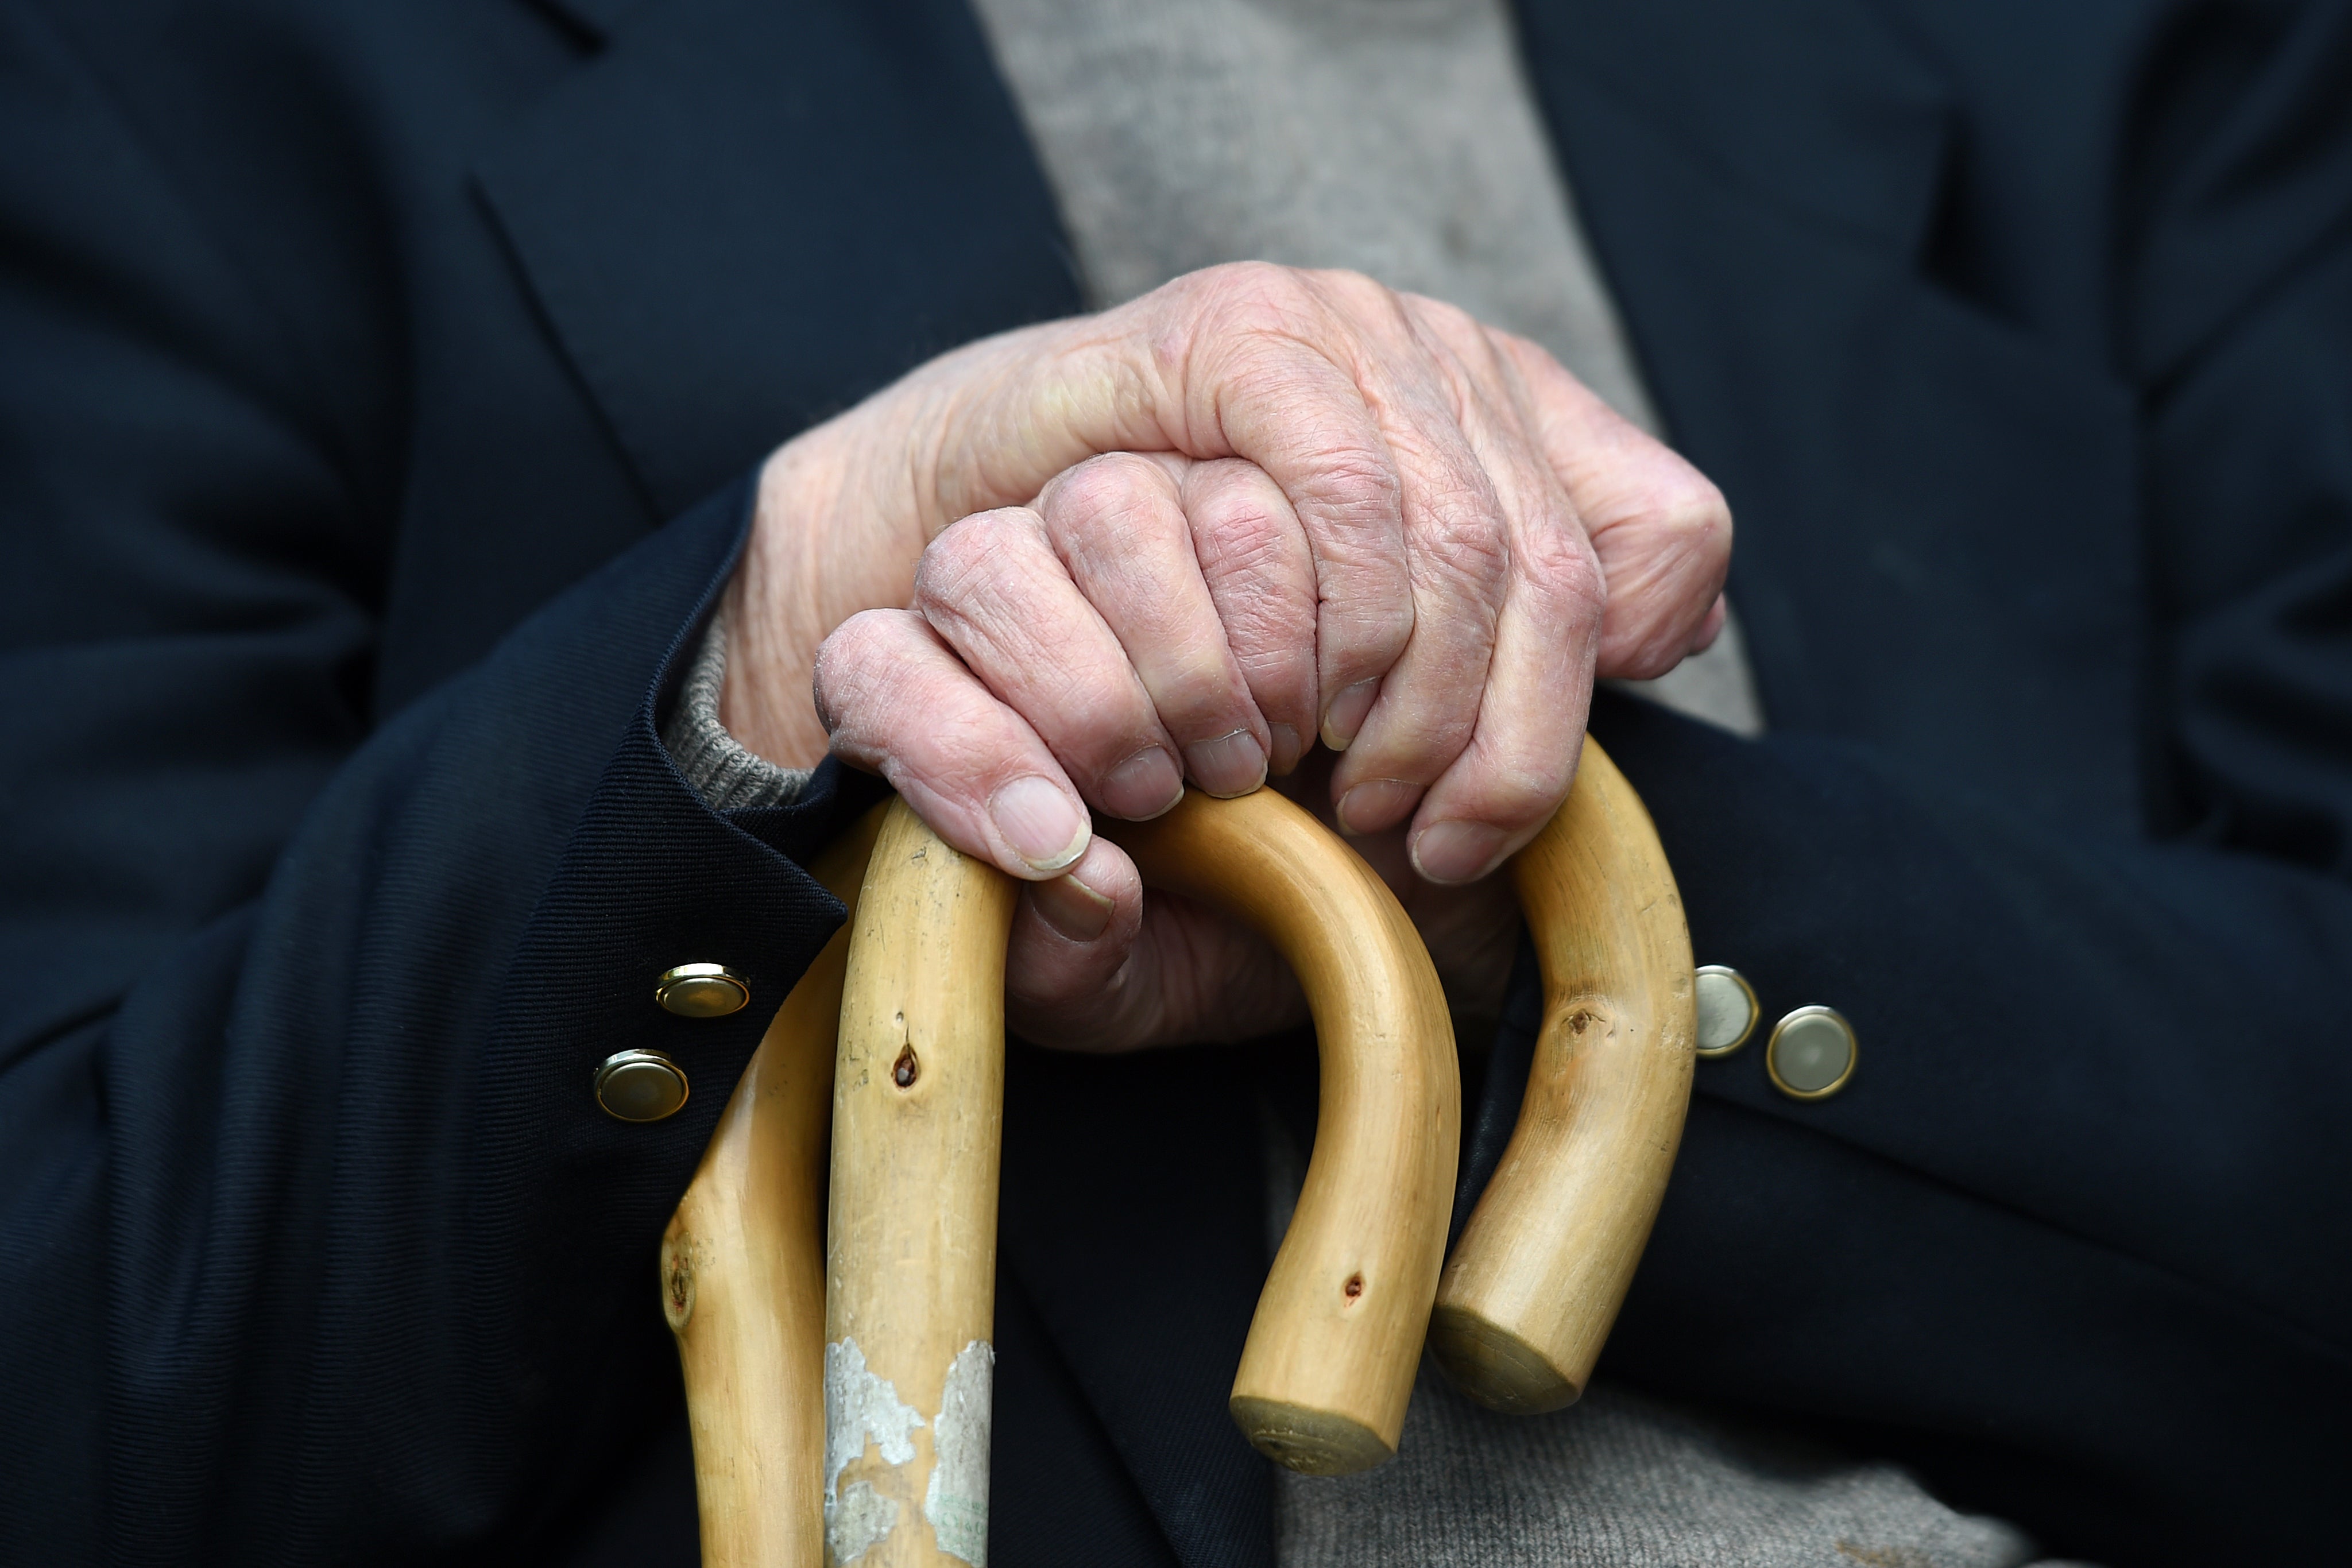 Alzheimer’s disease is the most common form of age-related dementia (Joe Giddens/PA)